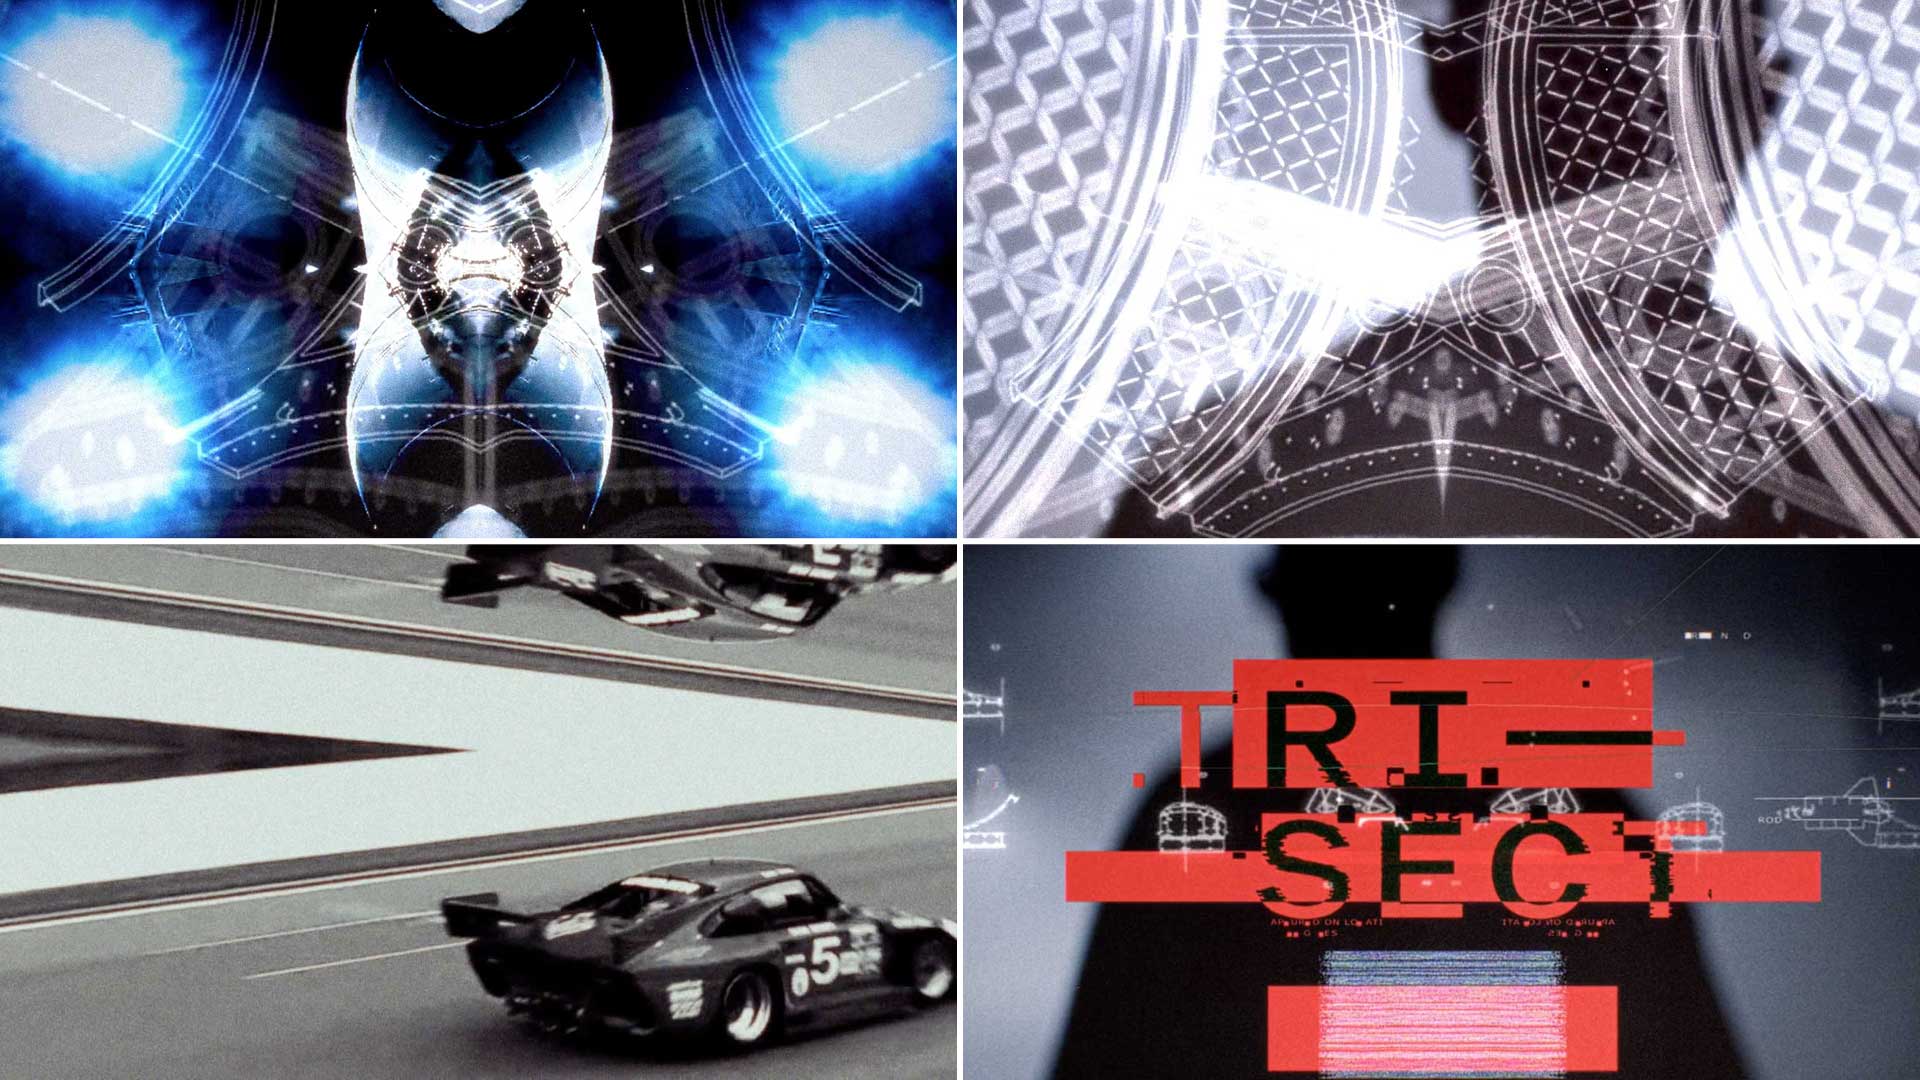 Ash Thorp Wraps “Tri-Sect” Short Film in Design, Science, and Mystery – Motion design [Video]